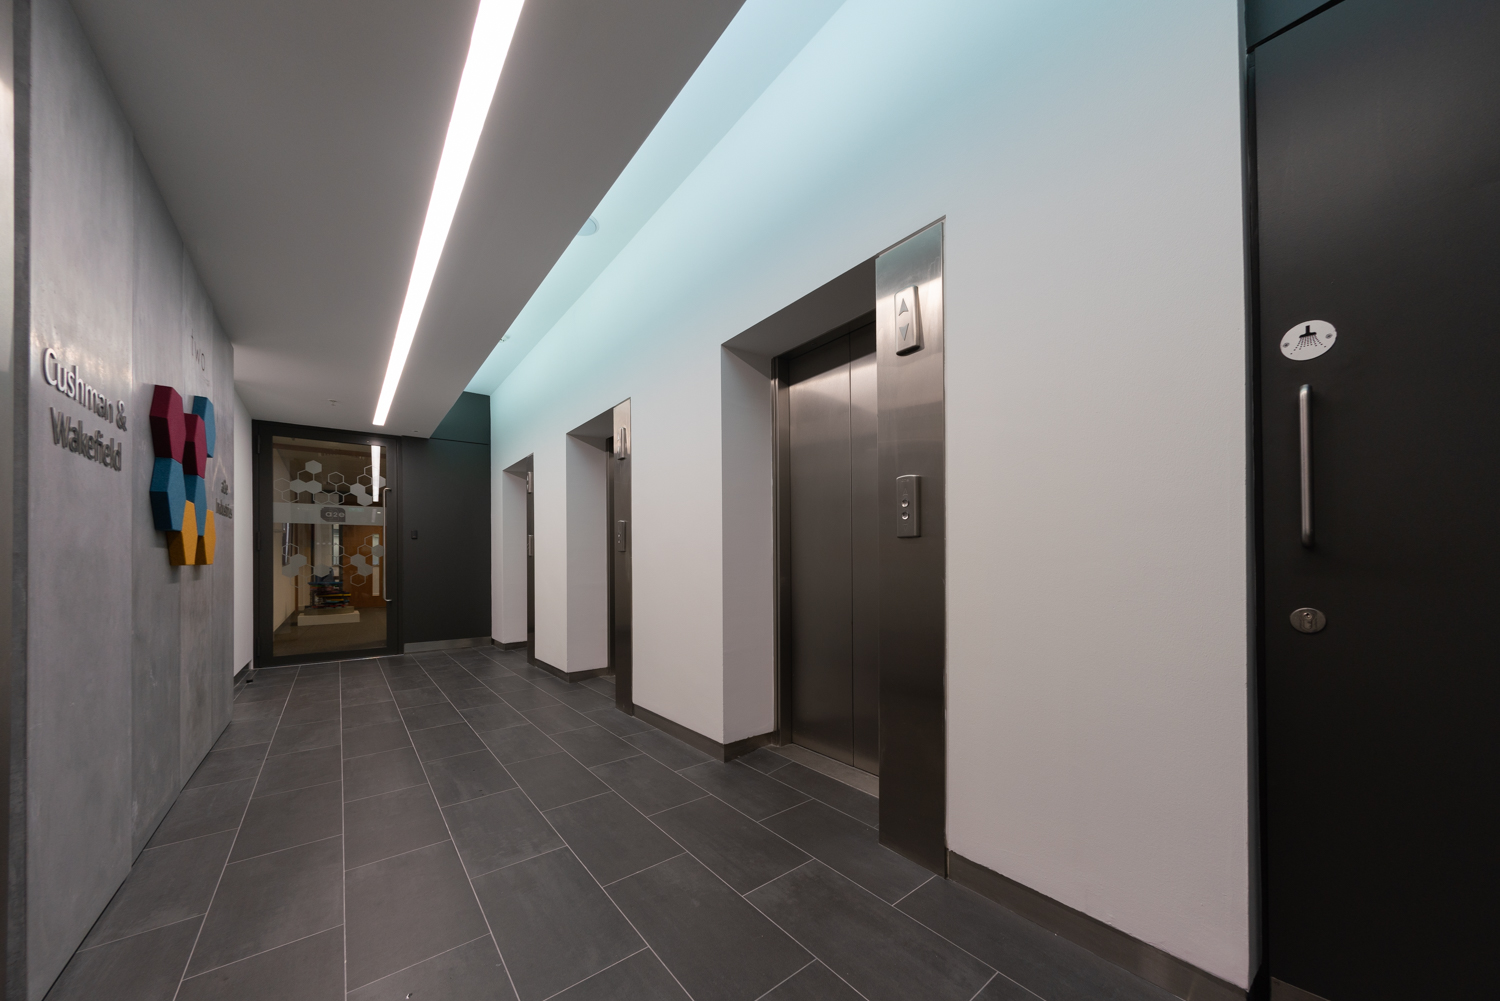 Marsden Street, Manchester – Completed Project